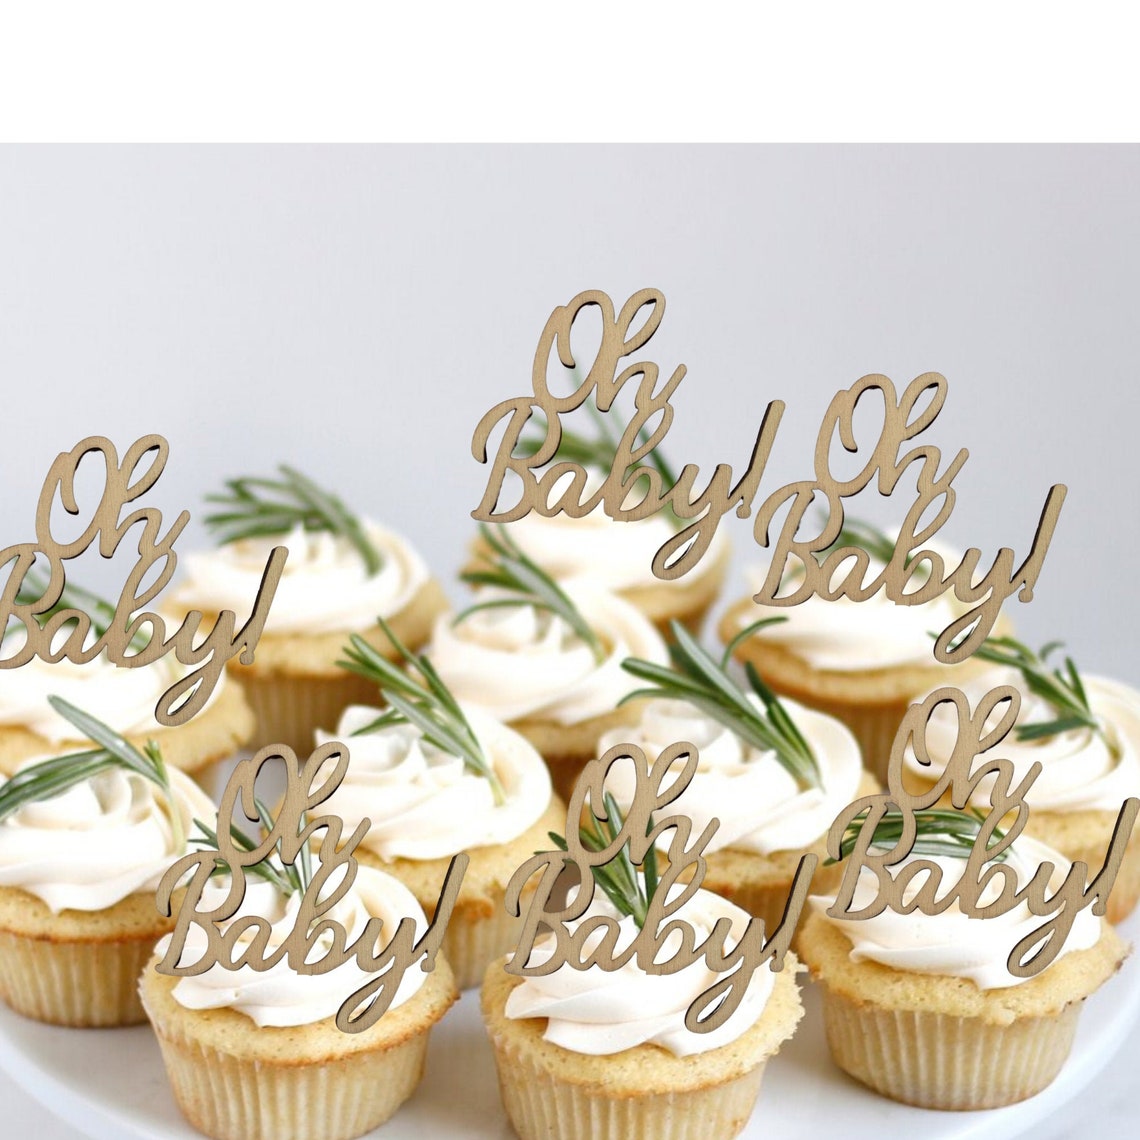 SET OF 12 Oh Baby Cupcake Toppers, Oh Baby Wooden Cupcake Toppers